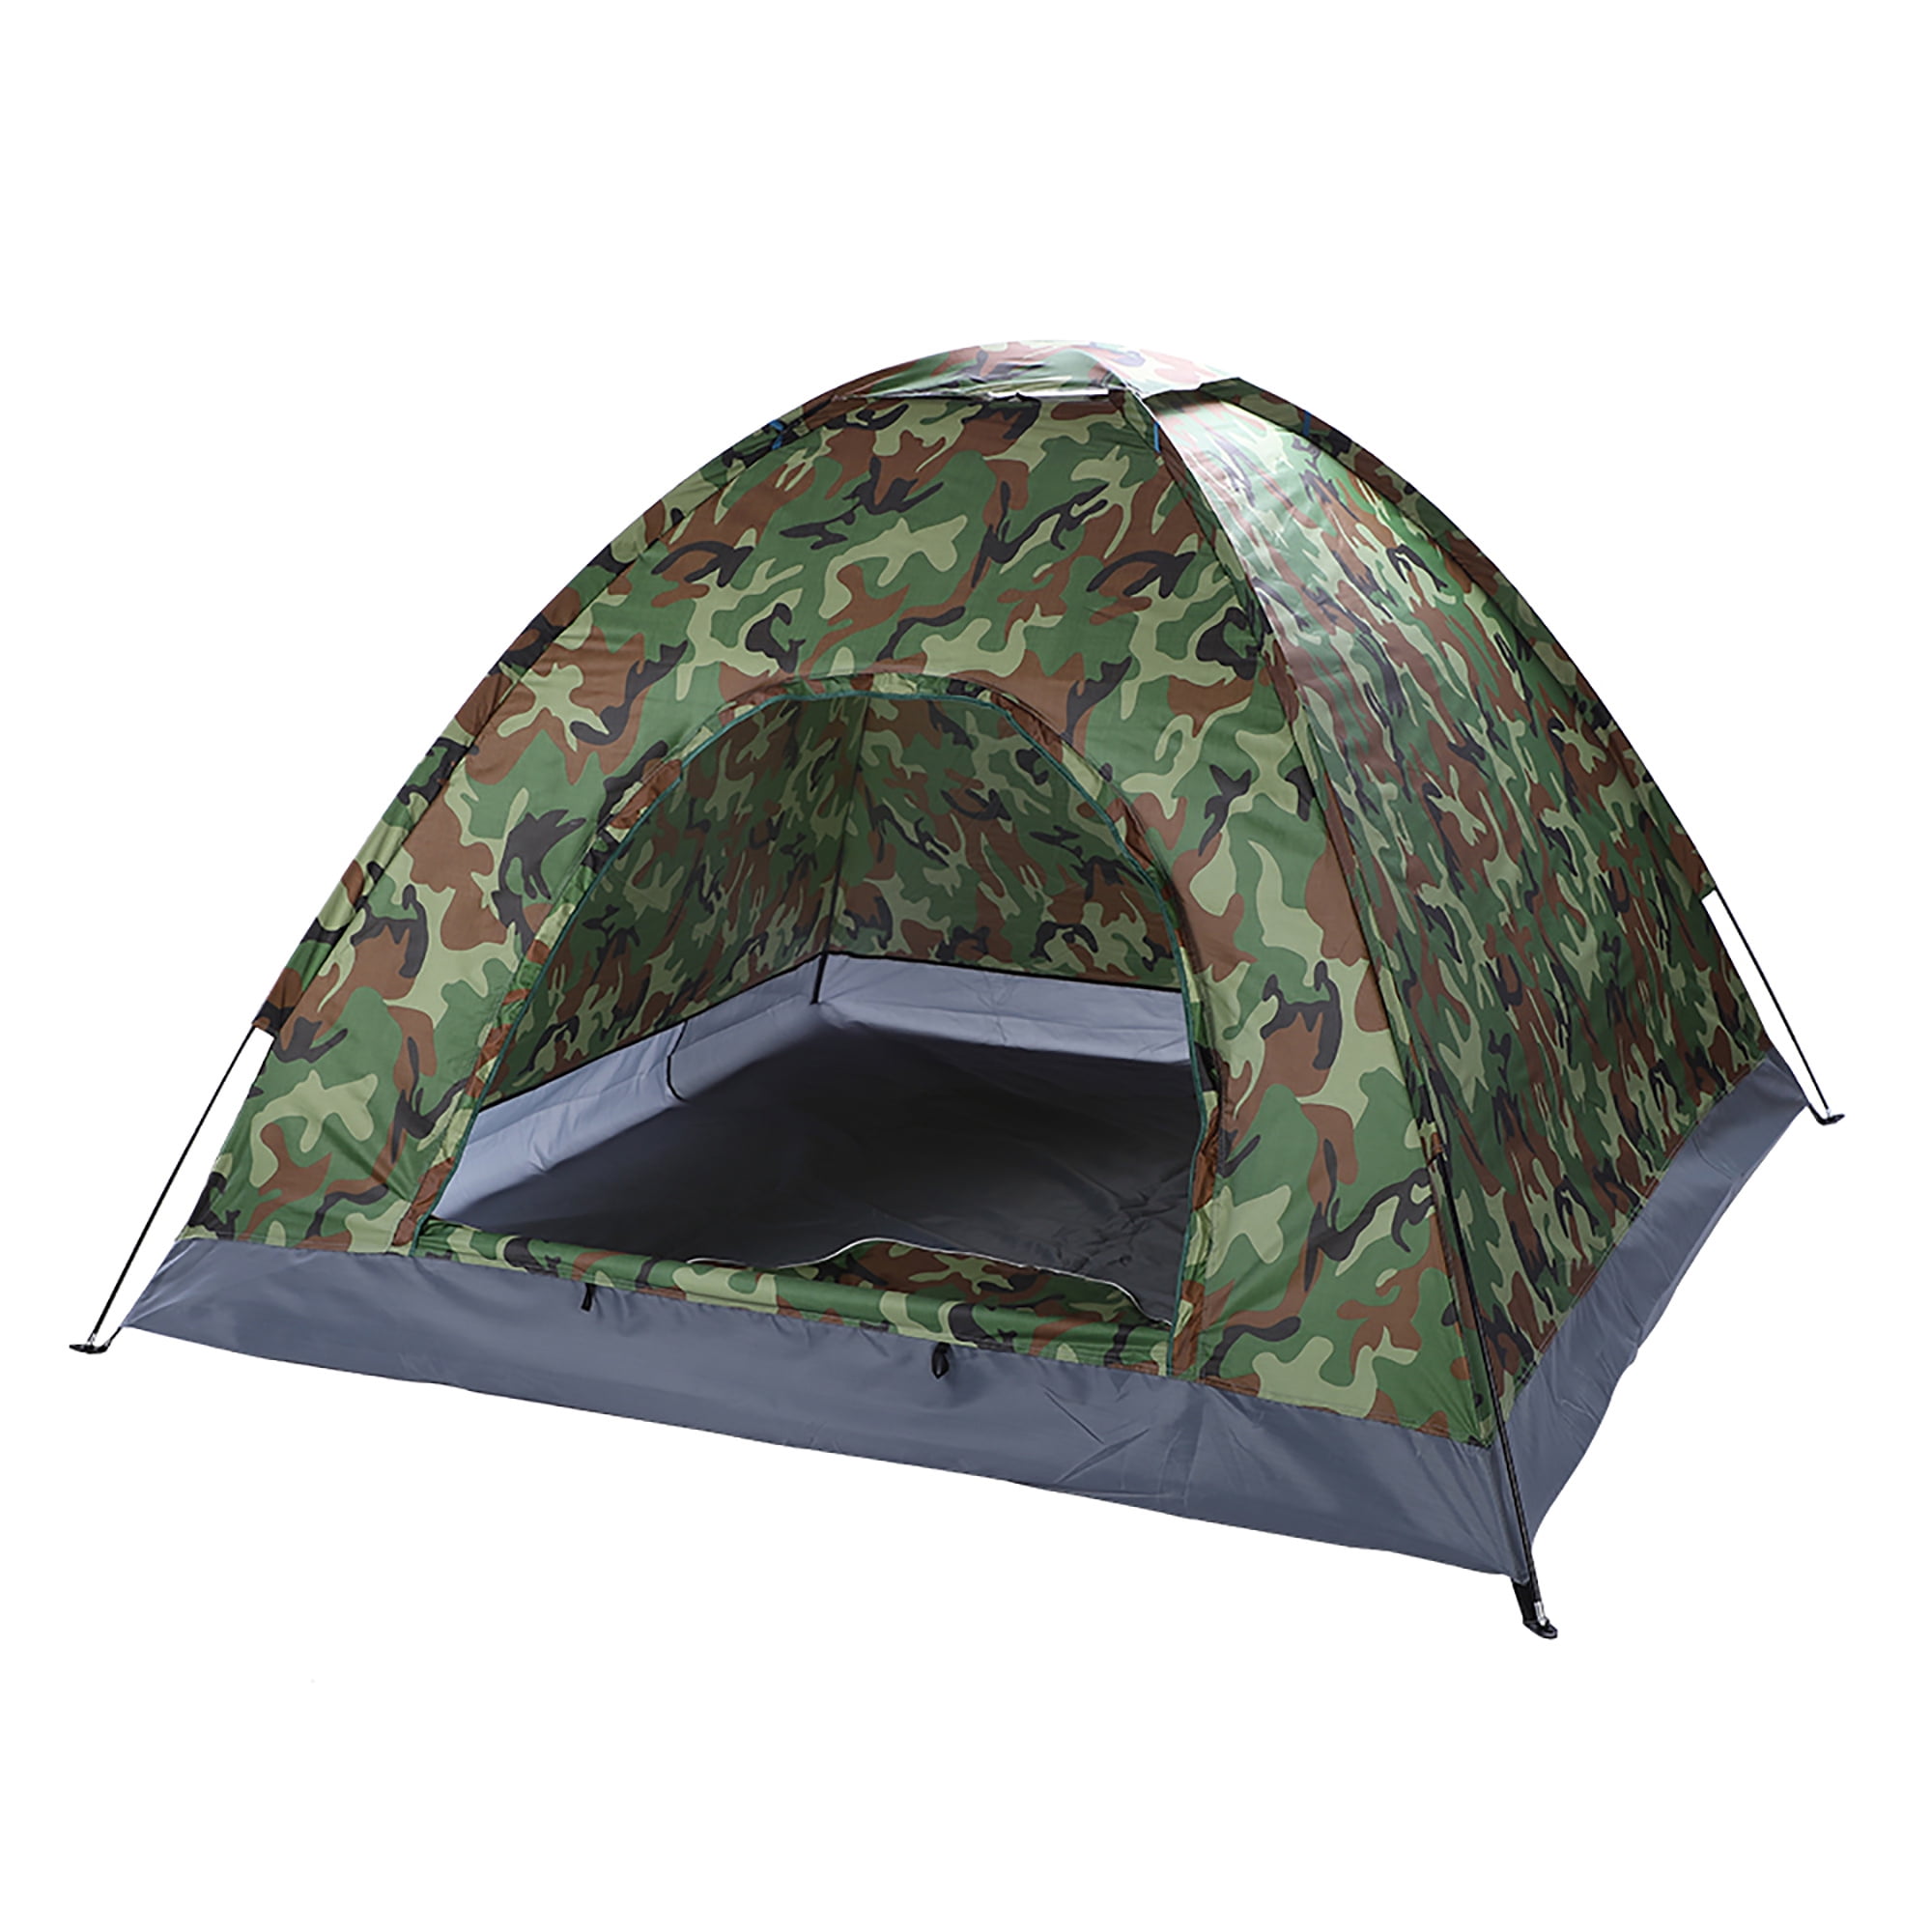 Outdoor Camouflage Pop Up Holiday Camping Play Tent Dome Easy Quick Light indoor 